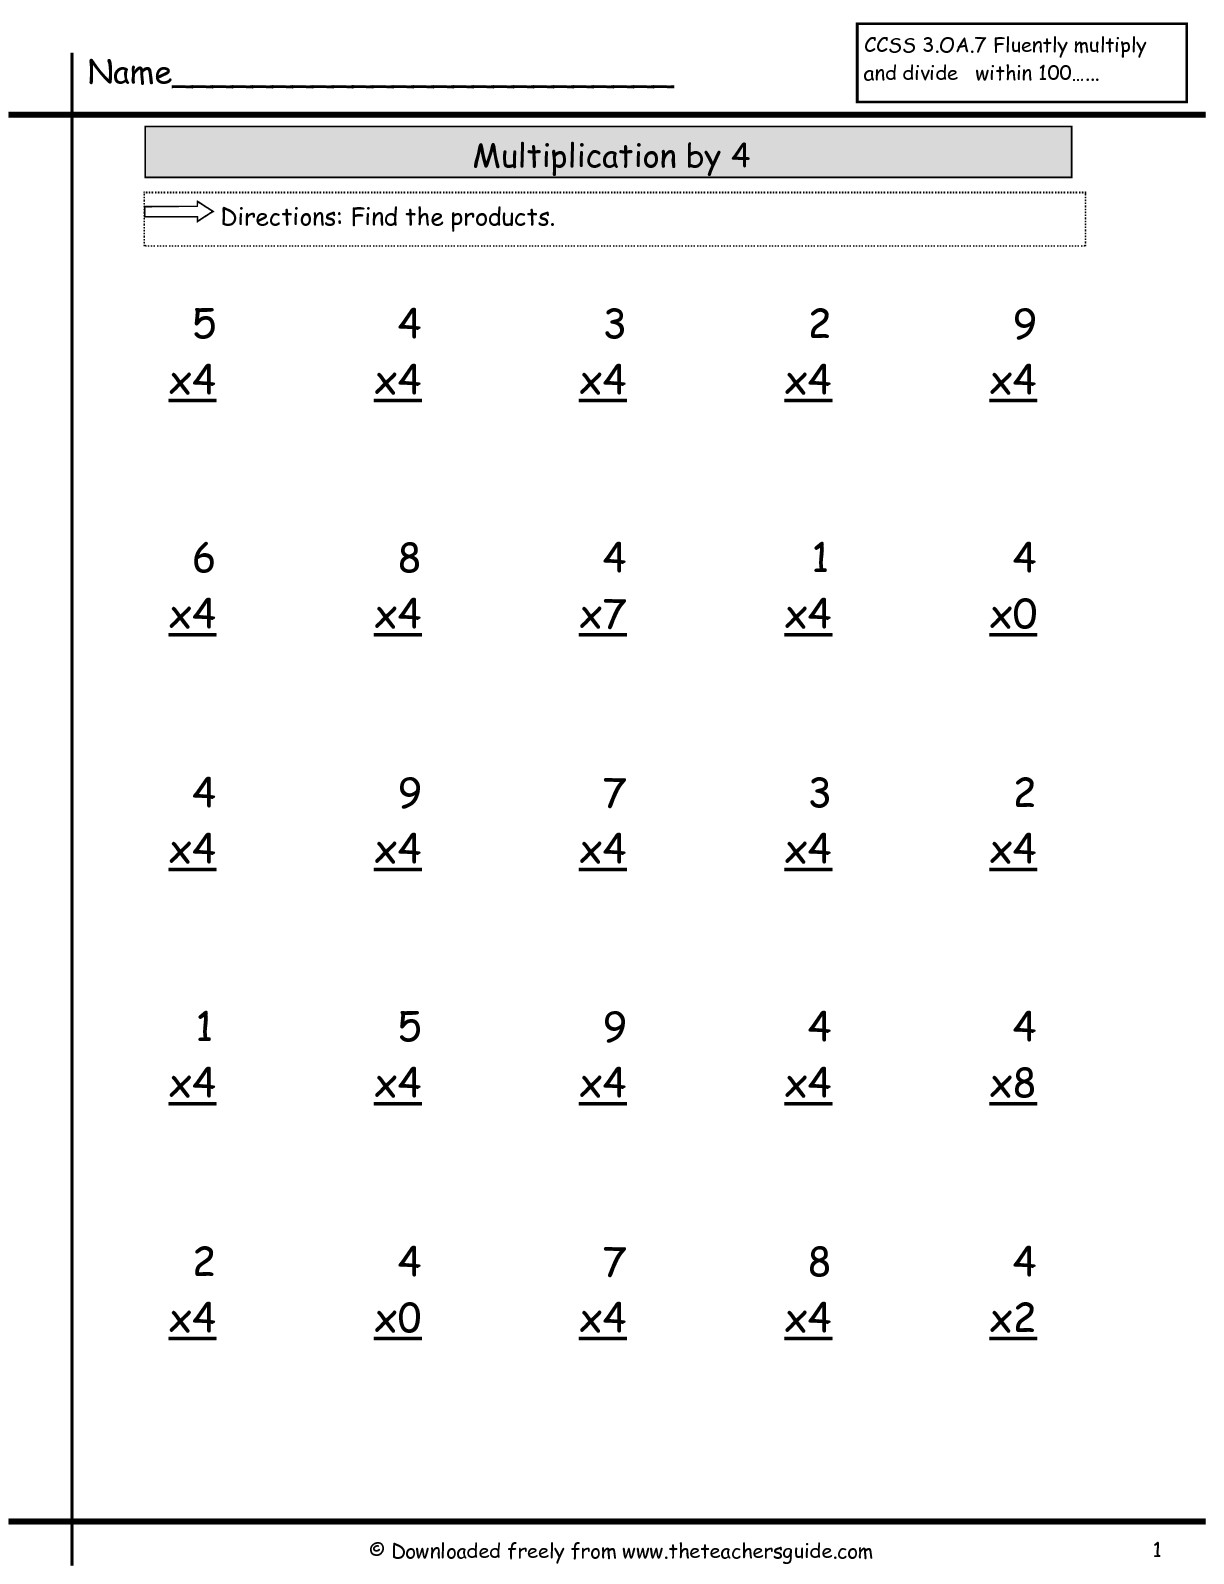 Multiplication Facts Worksheets From The Teacher&amp;#039;s Guide in 4 Multiplication Worksheets